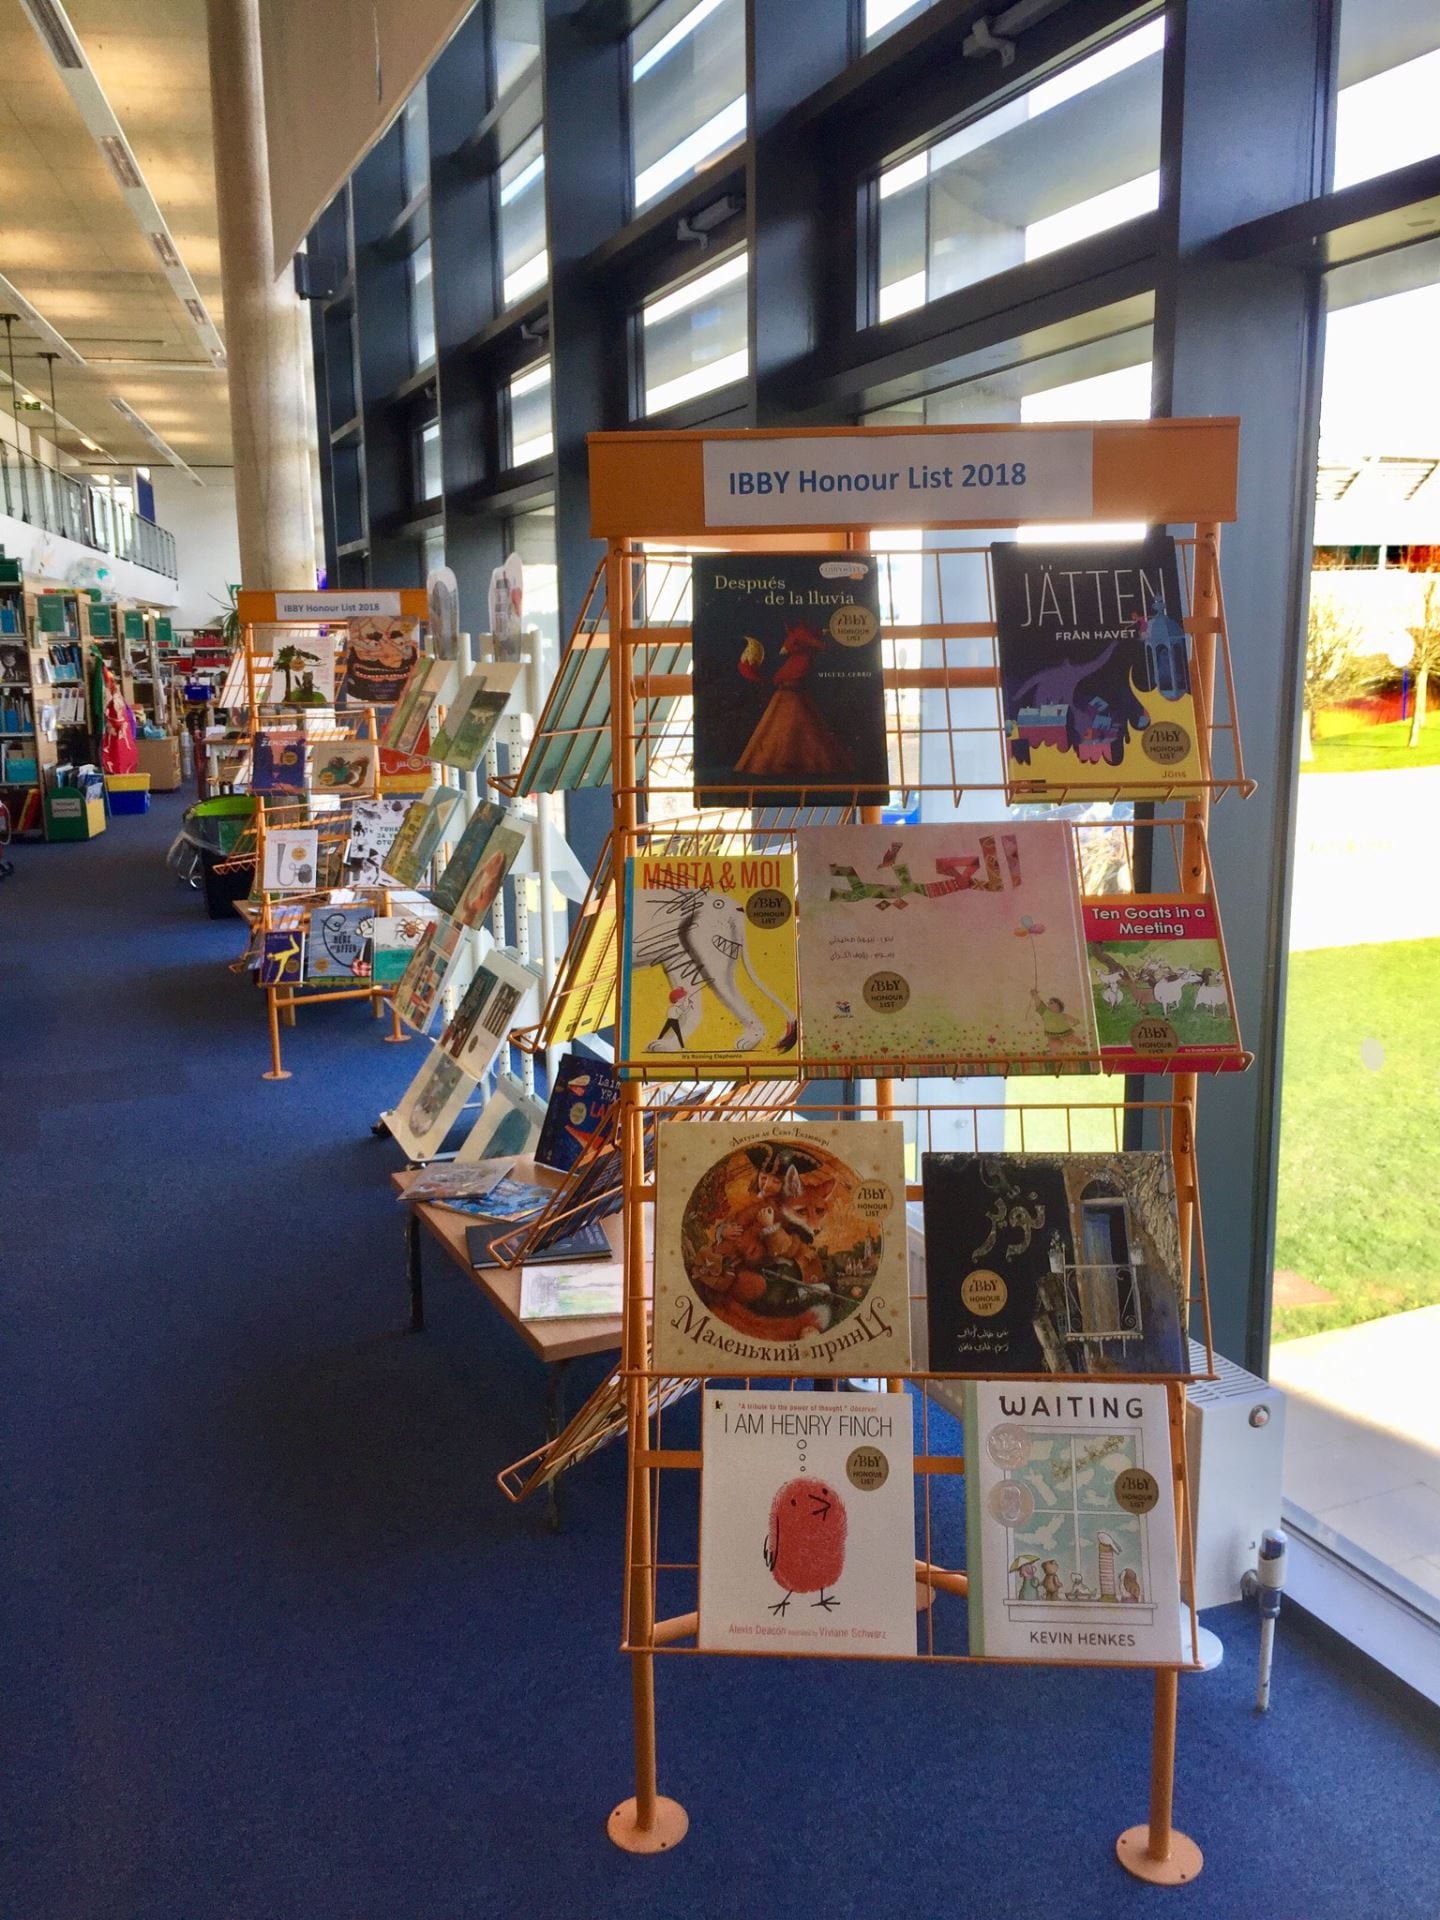 Display of IBBY in Curriculum Centre